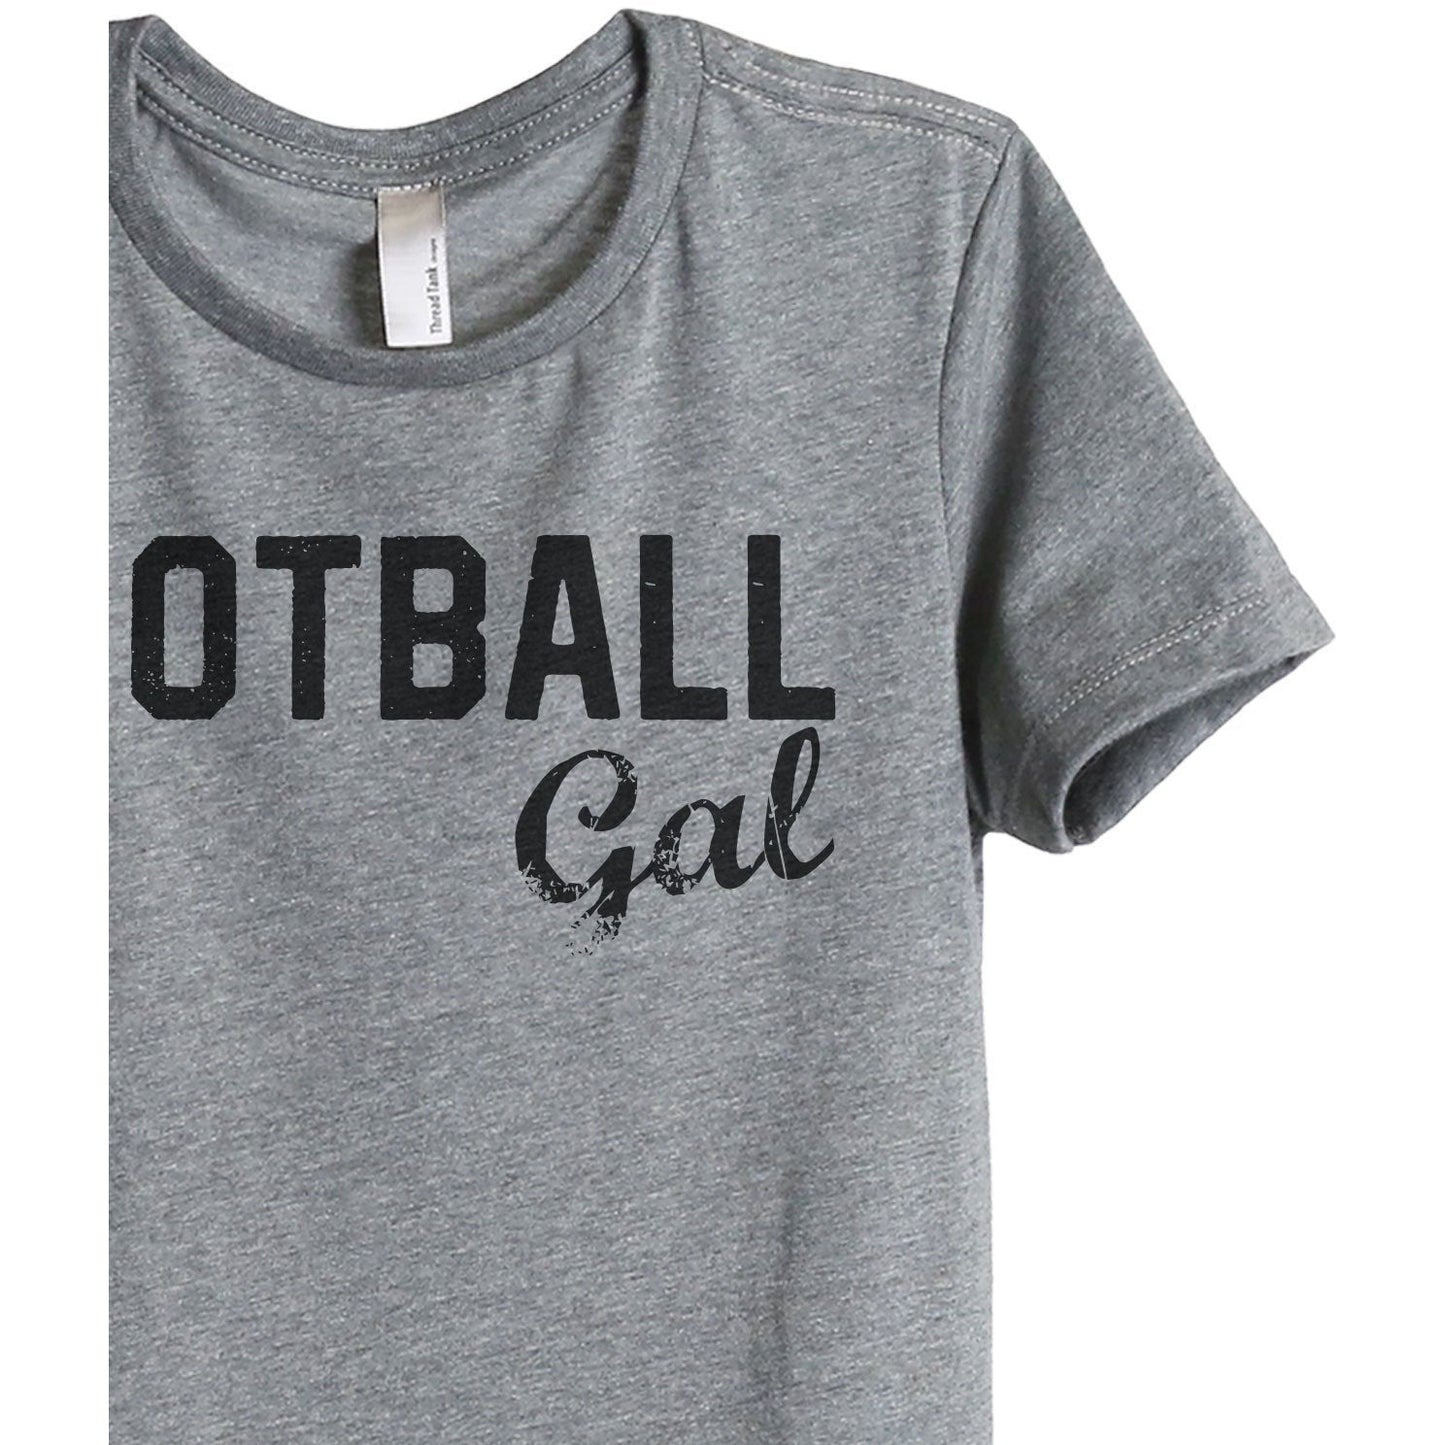 Football Gal Women's Relaxed Crewneck T-Shirt Top Tee Heather Grey Zoom Details
